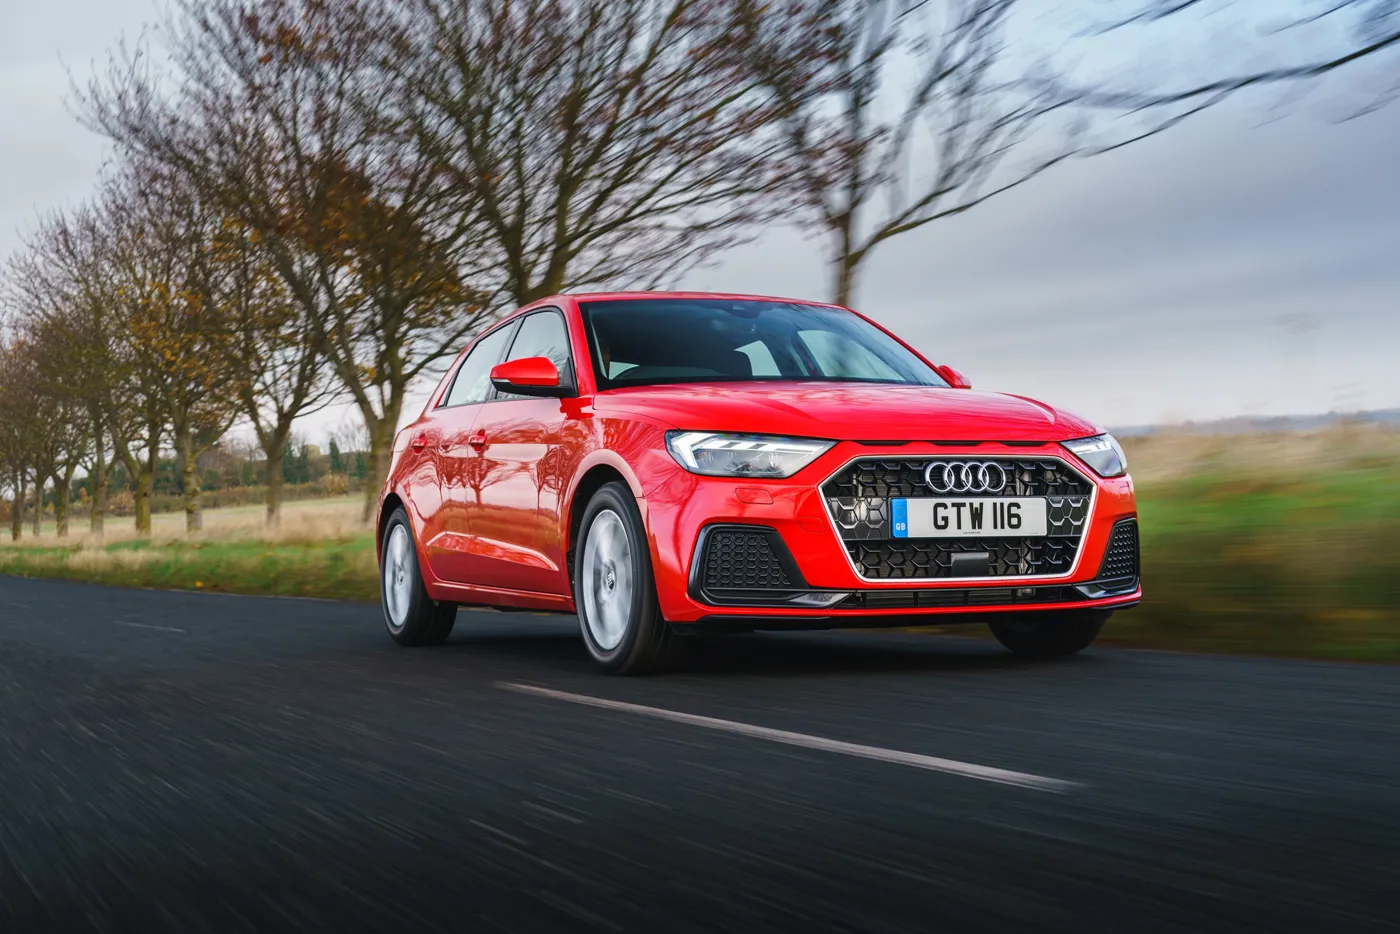 2013 Audi A1 Sportback To Launch In Australia By Late Q2